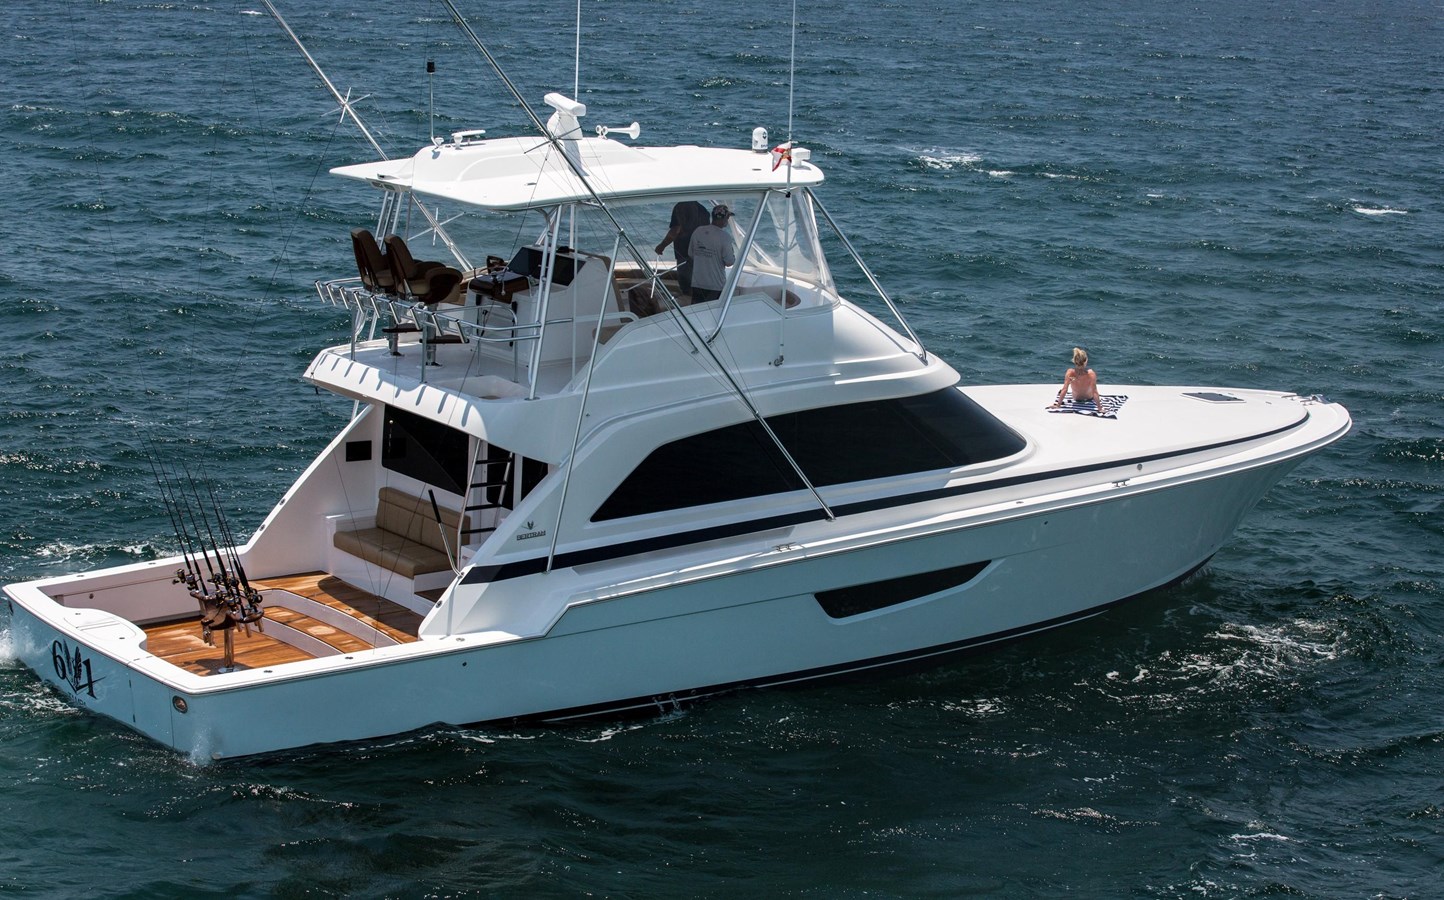 Yacht trawlers for sale: Comfortable and efficient vessels for long-distance cruises